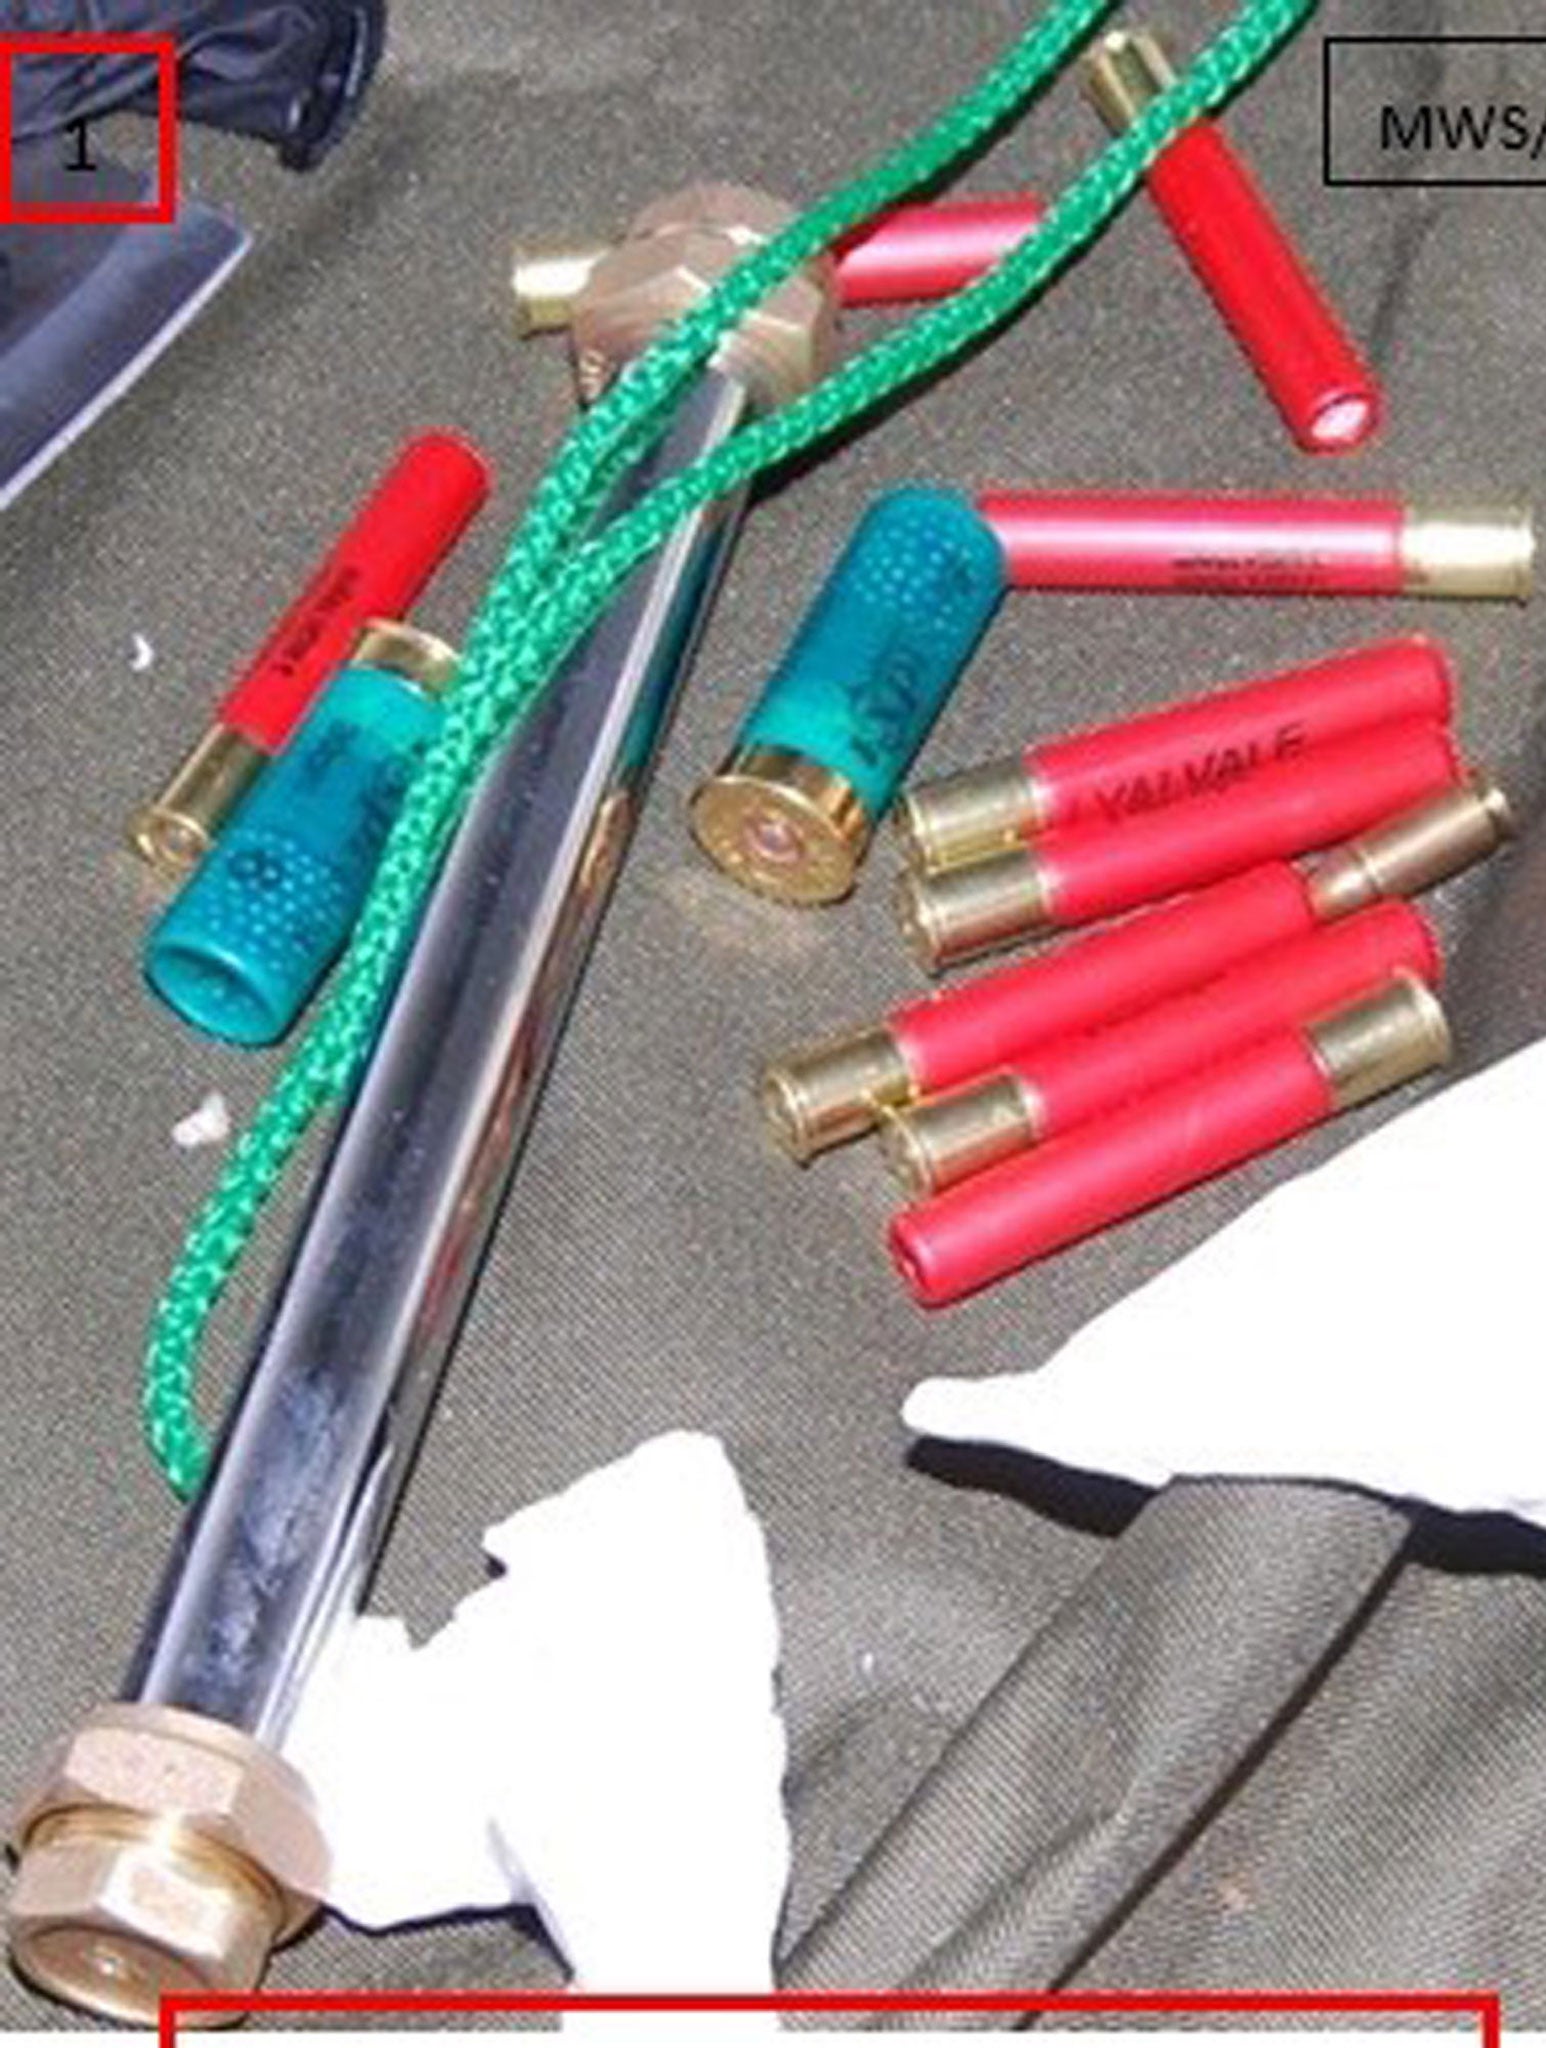 Shotgun cartridges and a partially constructed pipe bomb that was found stashed in Naweed Ali’s Seat Leon car